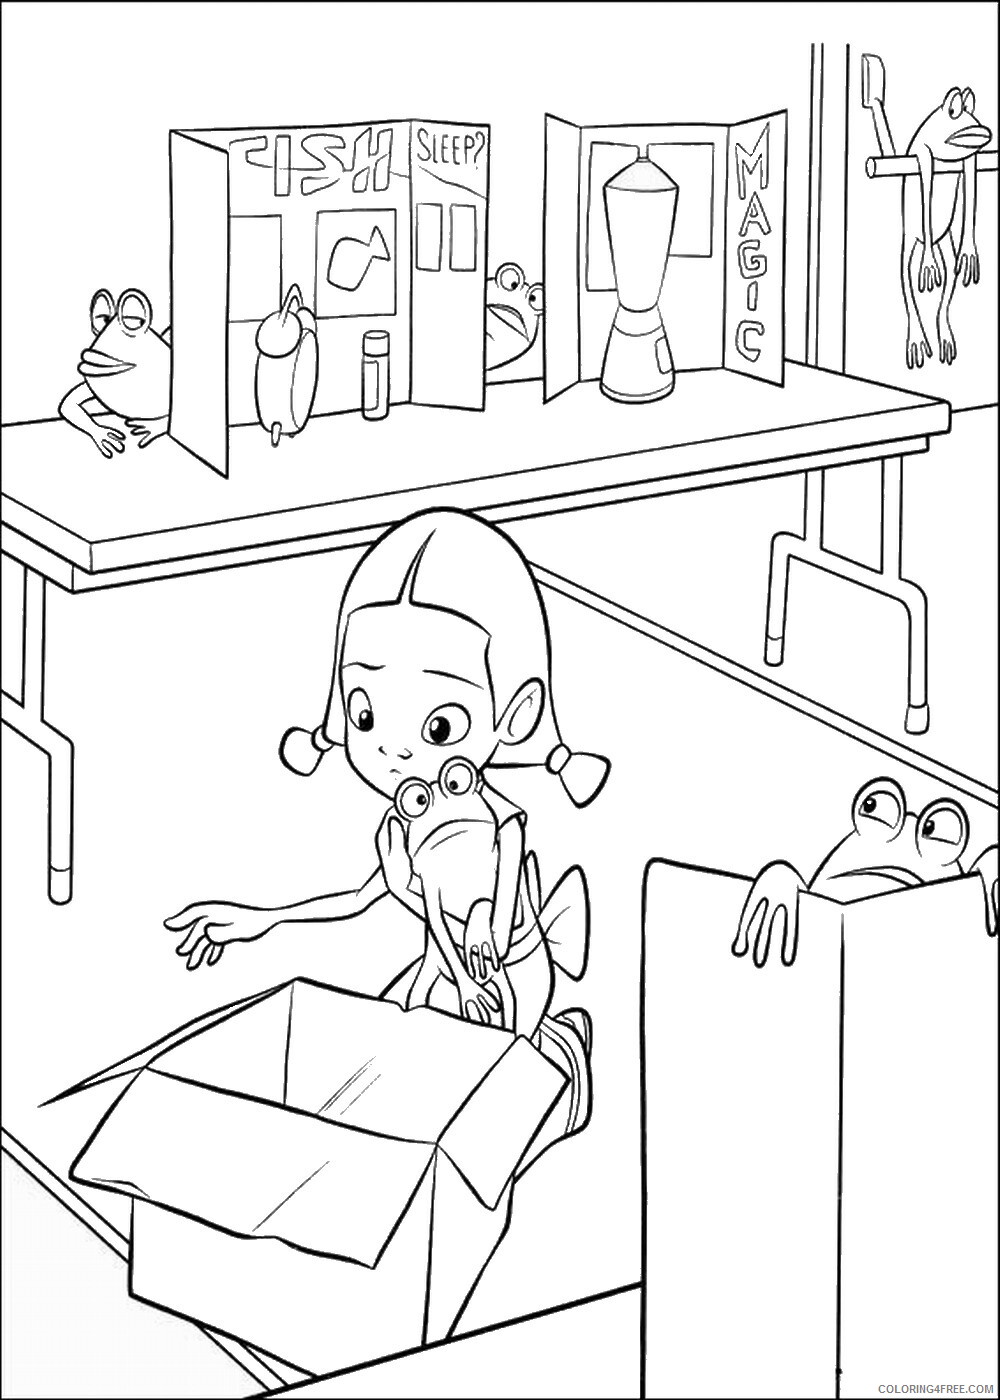 Meet the Robinsons Coloring Pages TV Film Printable 2020 04972 Coloring4free